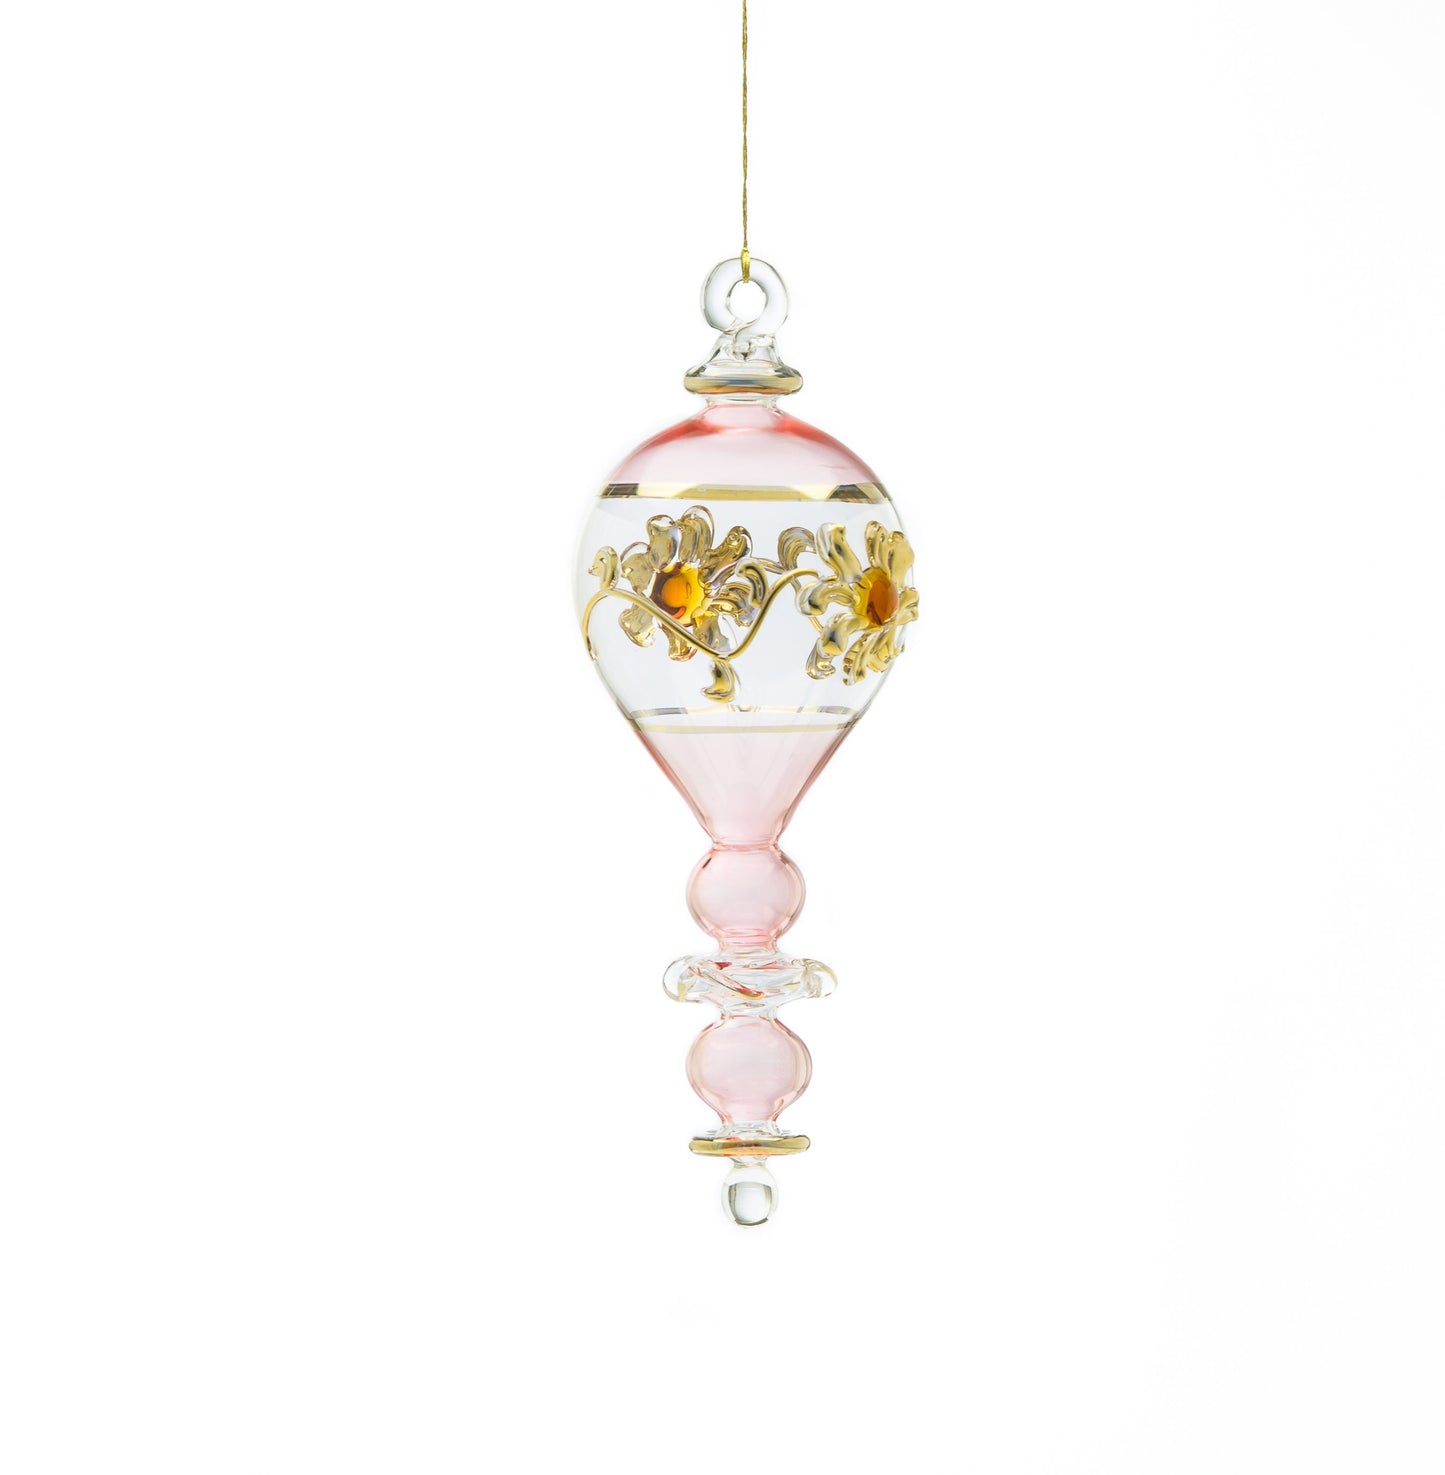 Pharaonic Vintage style pink Glass ornament for Christmas tree decorations engraved with 14K Gold flowers | antique christmas ornaments